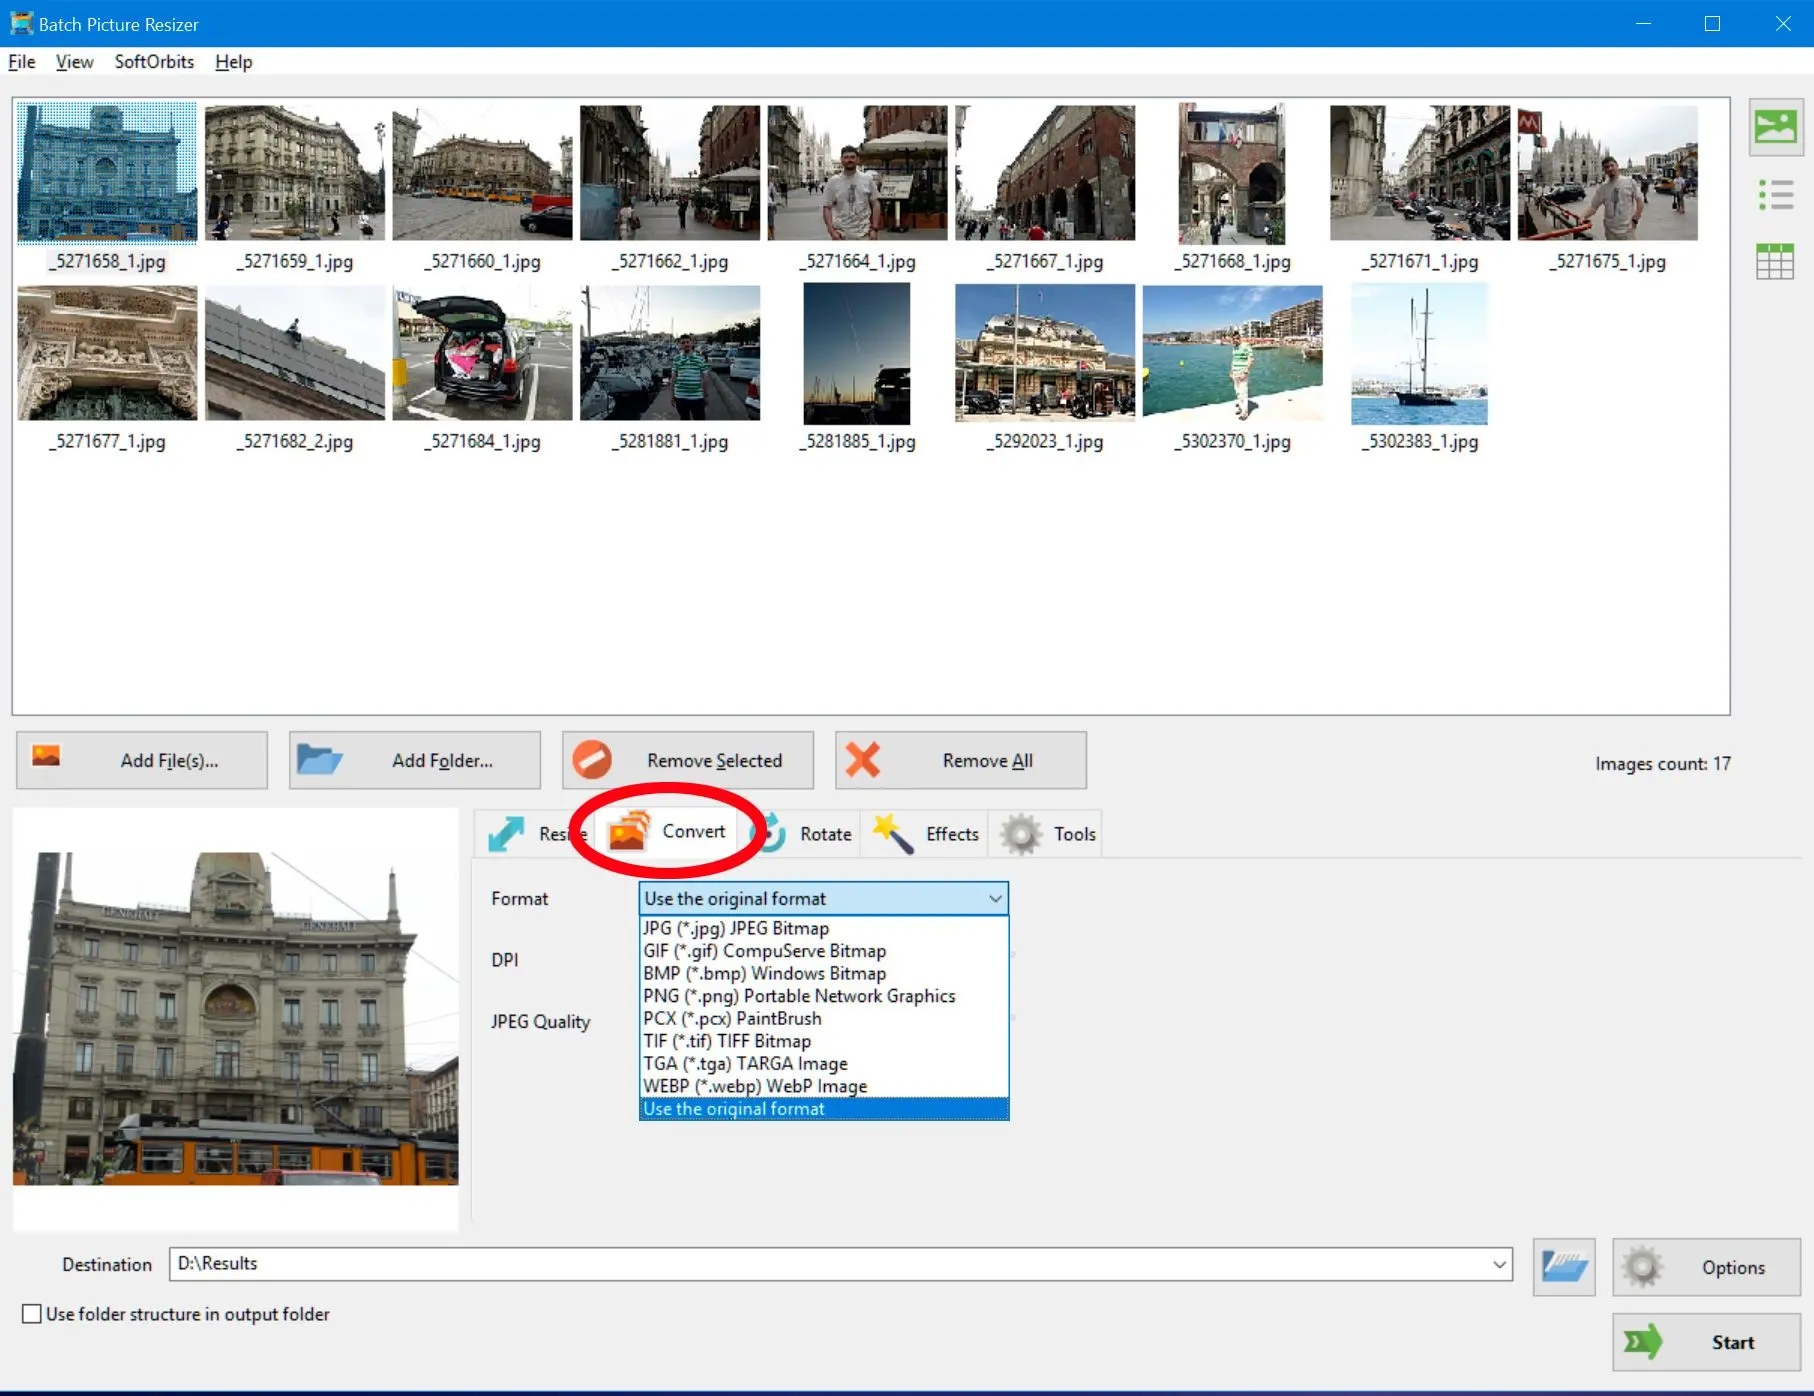 Convert your photos using Batch Picture Resizer..